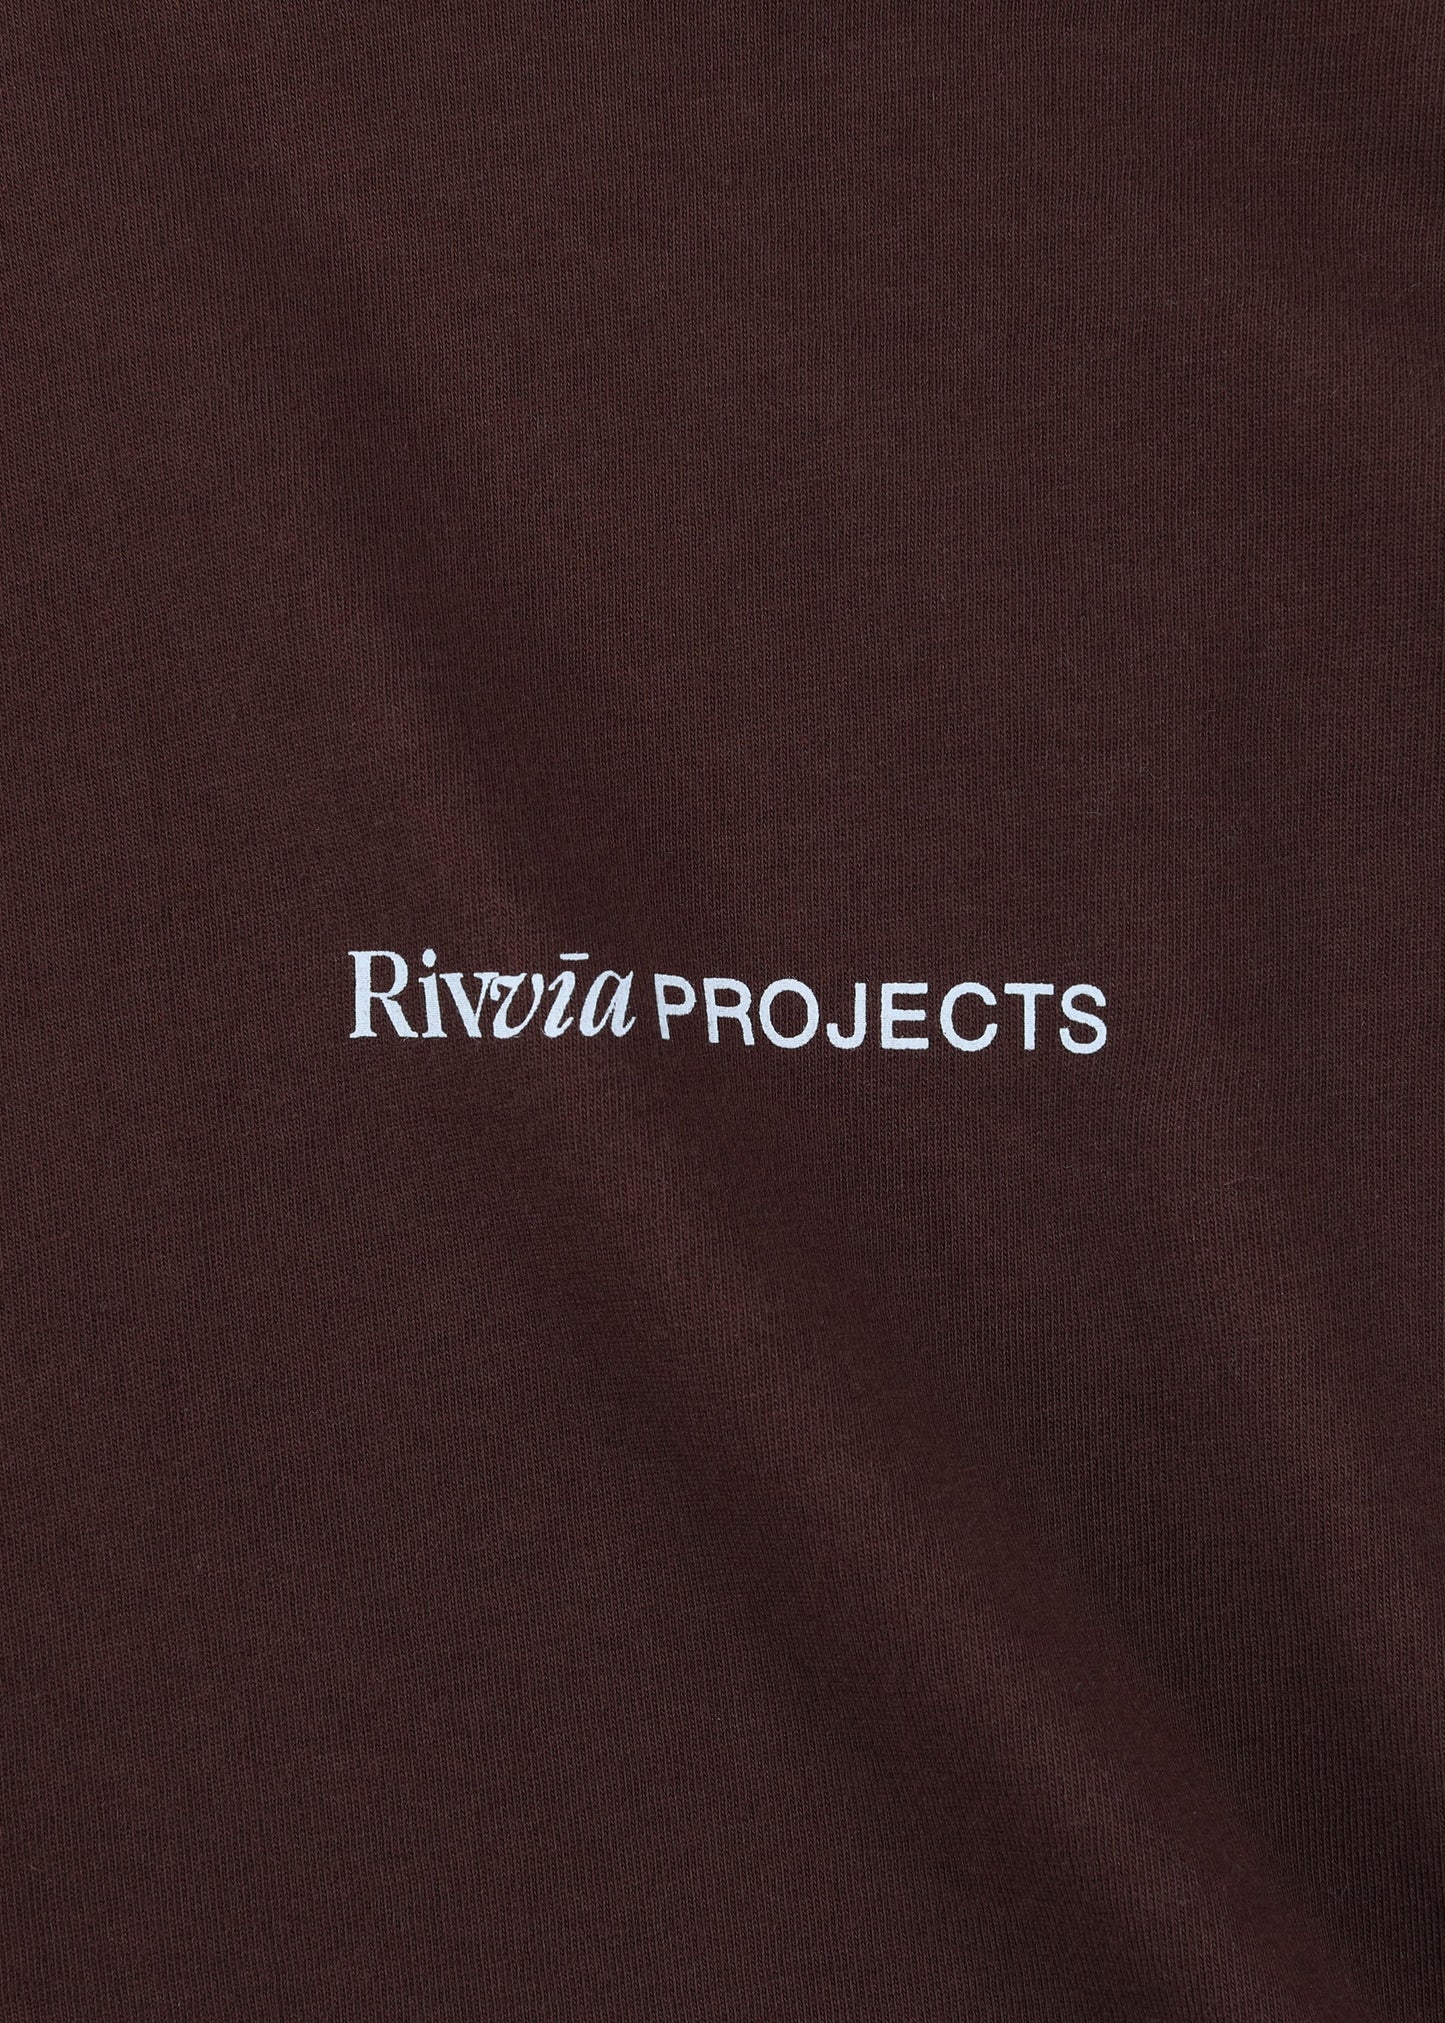 PROJECTING T-SHIRT : CHESTNUT